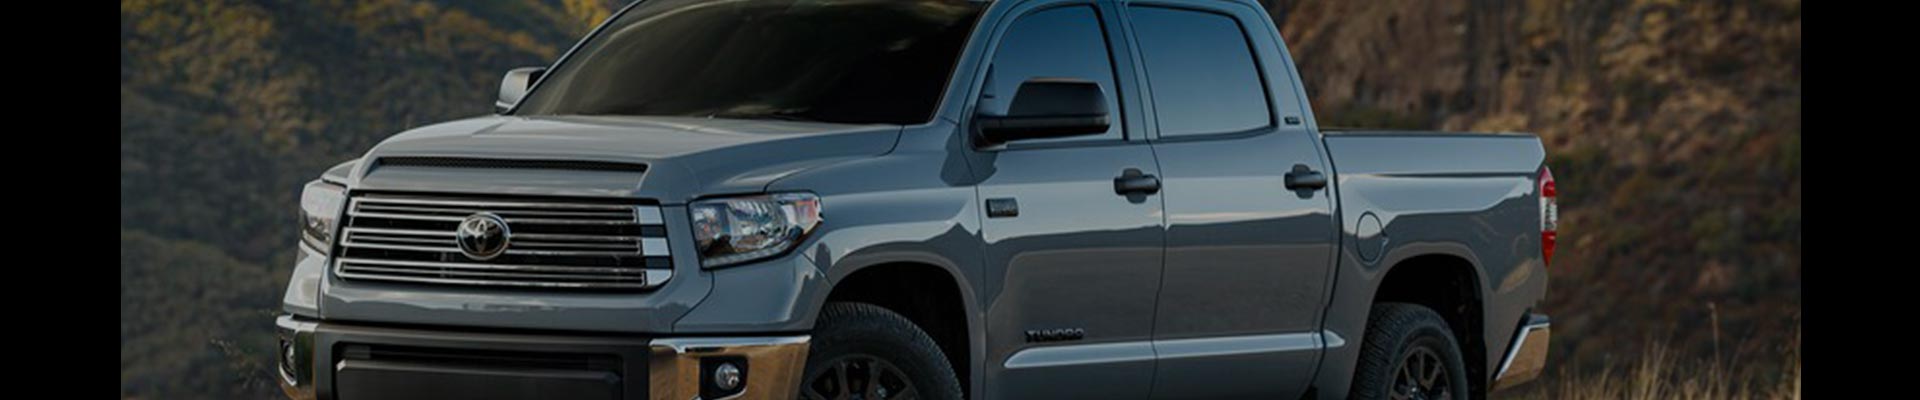 Shop Replacement and OEM 2020 Toyota Tundra Parts with Discounted Price on the Net